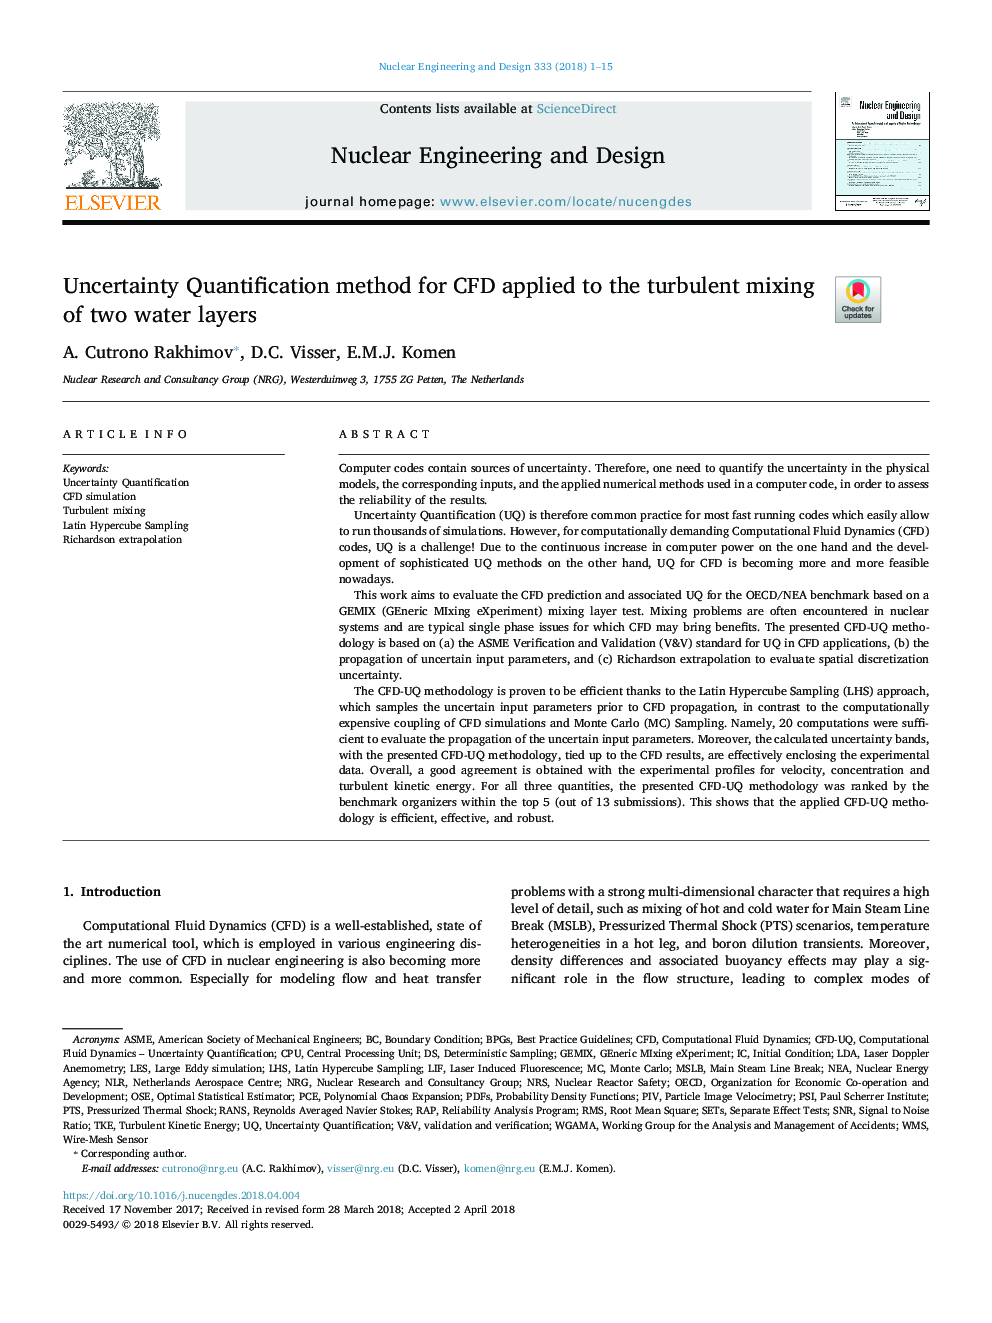 Uncertainty Quantification method for CFD applied to the turbulent mixing of two water layers